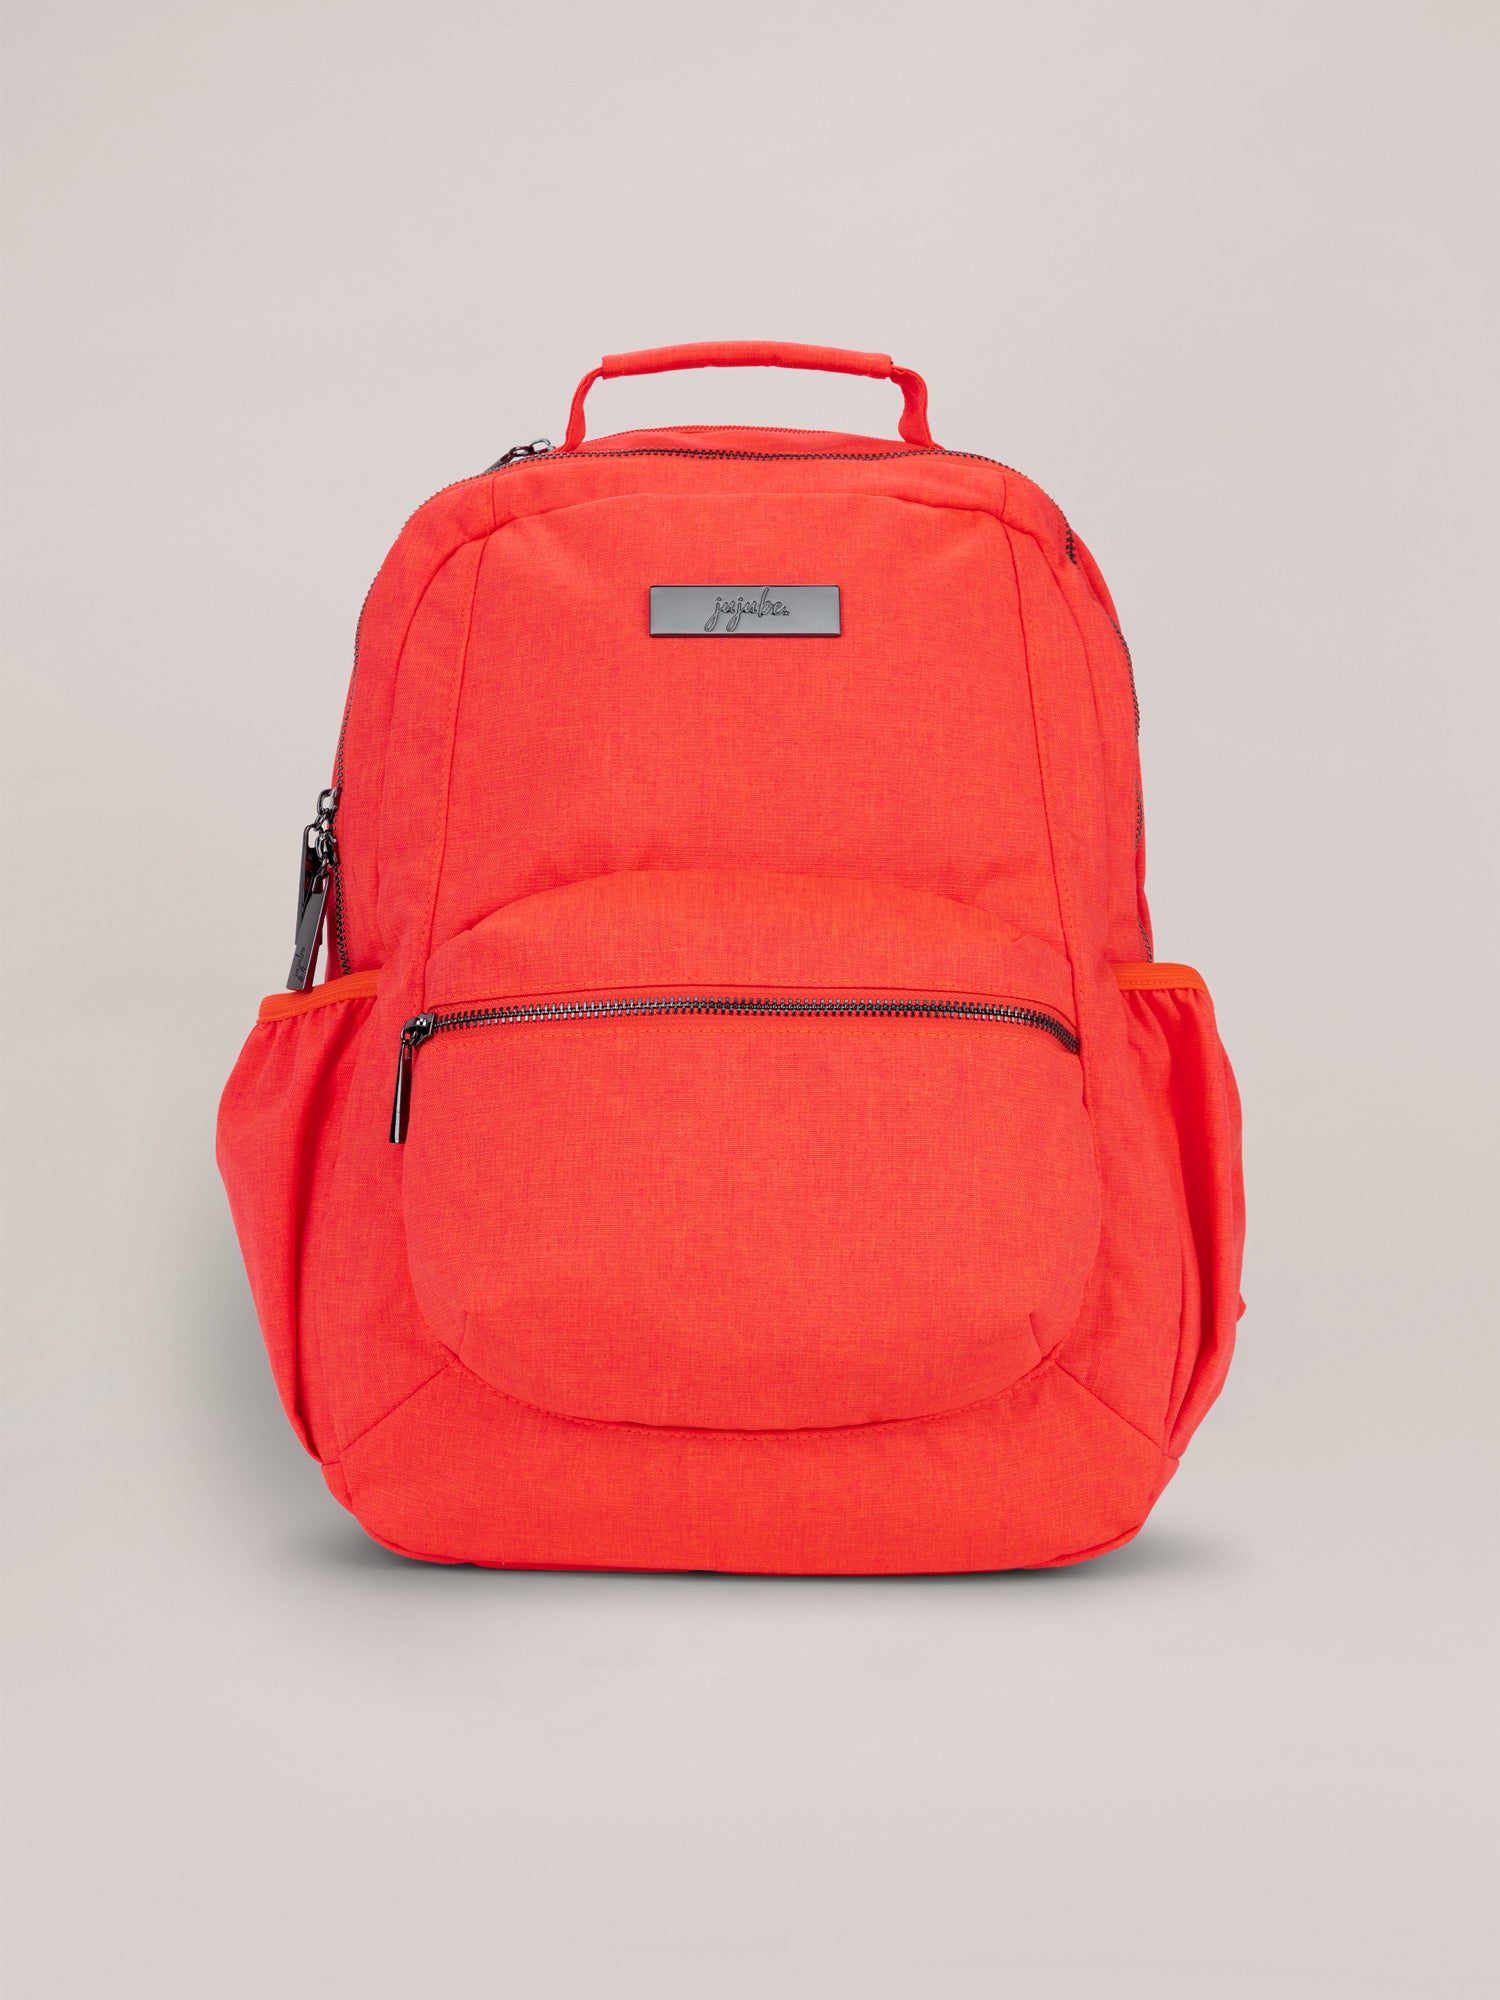 Neon Coral Be Packed Backpack Front View